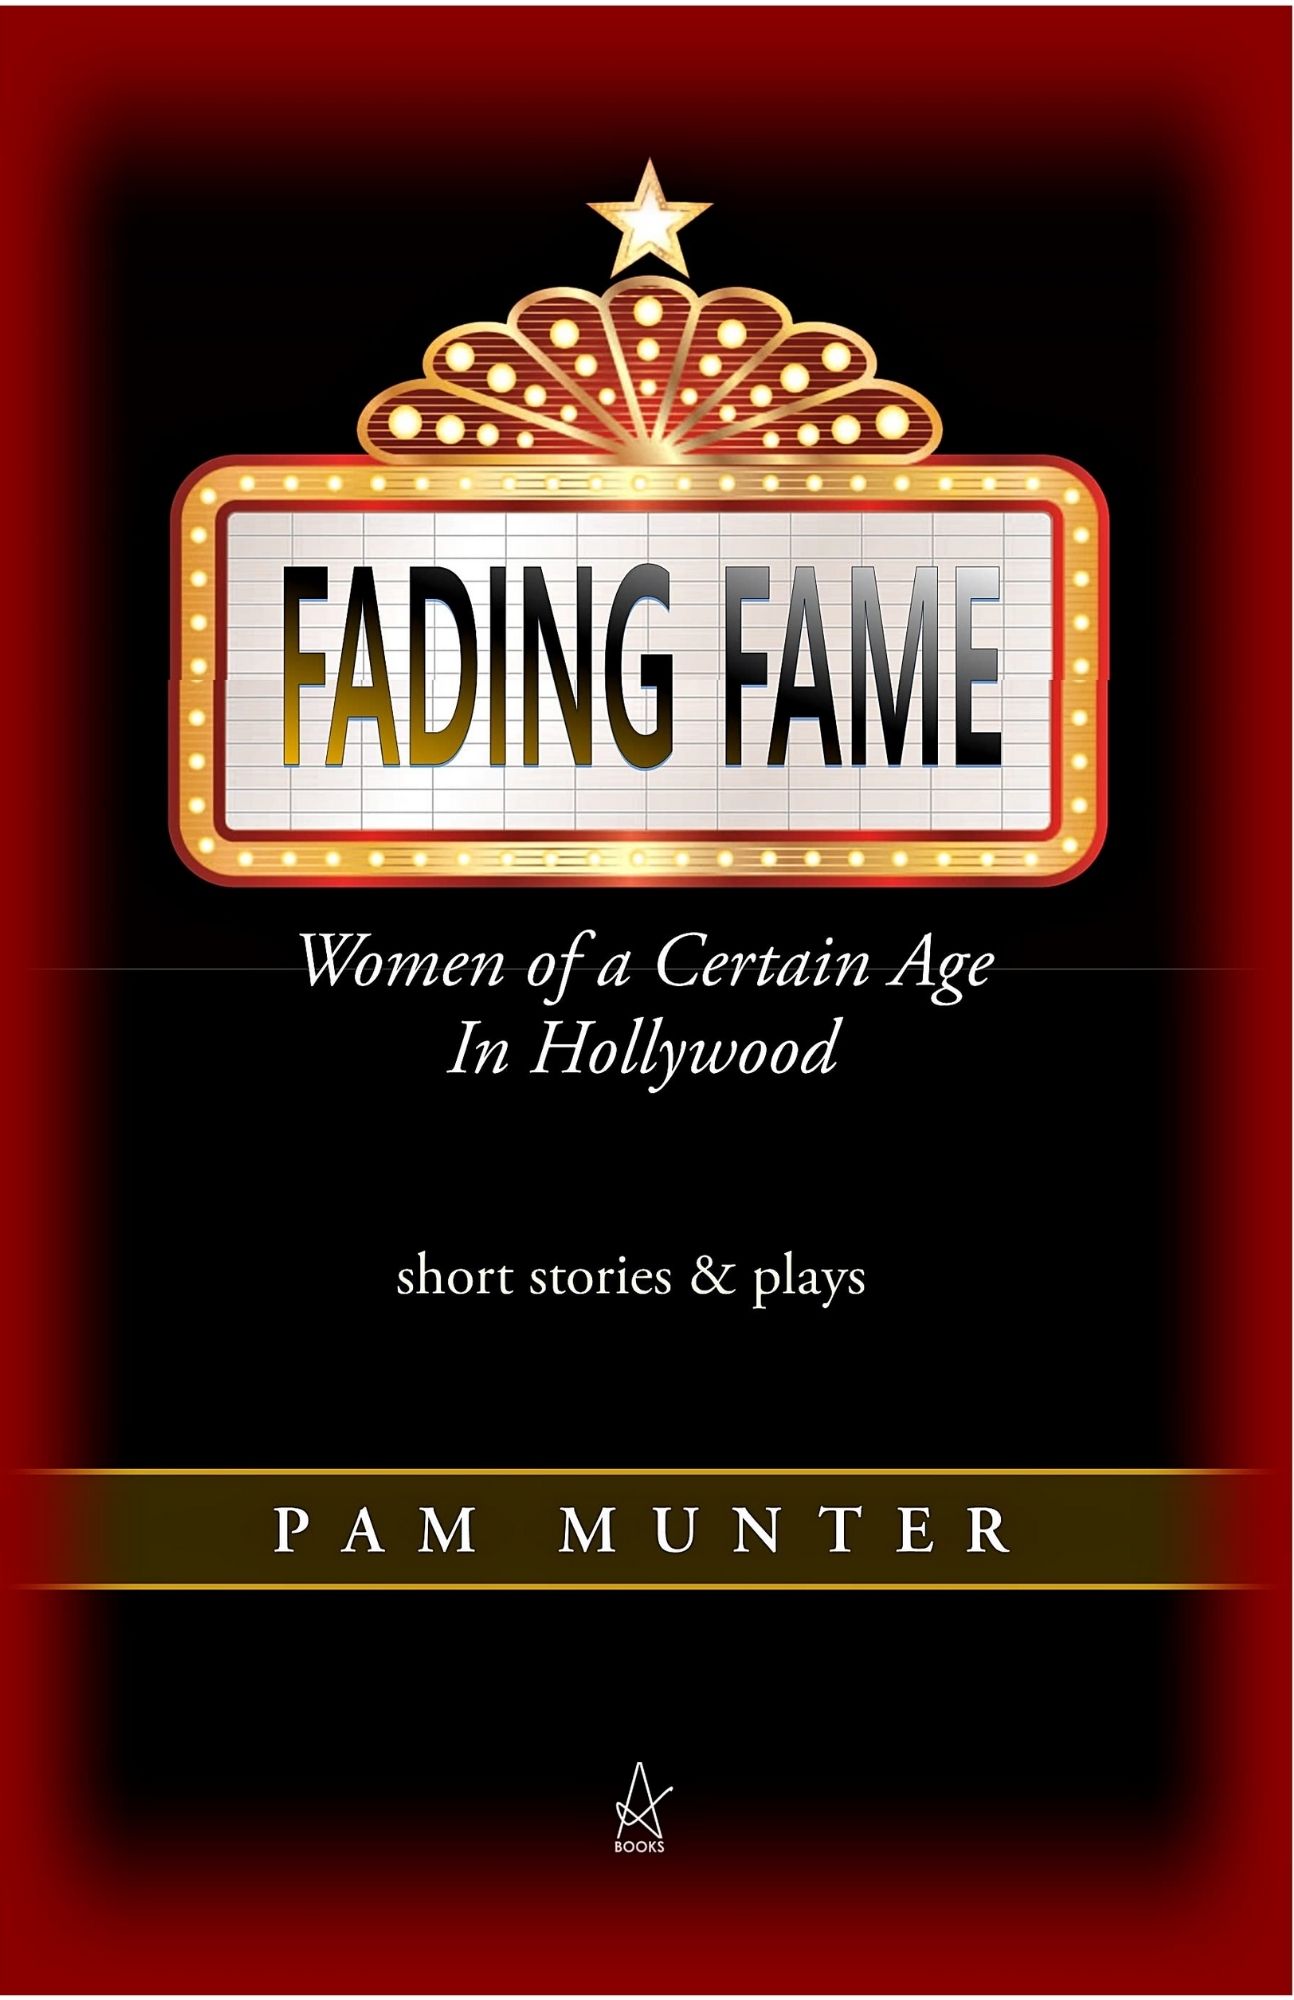 Fading Fame by Pam Munter book cover